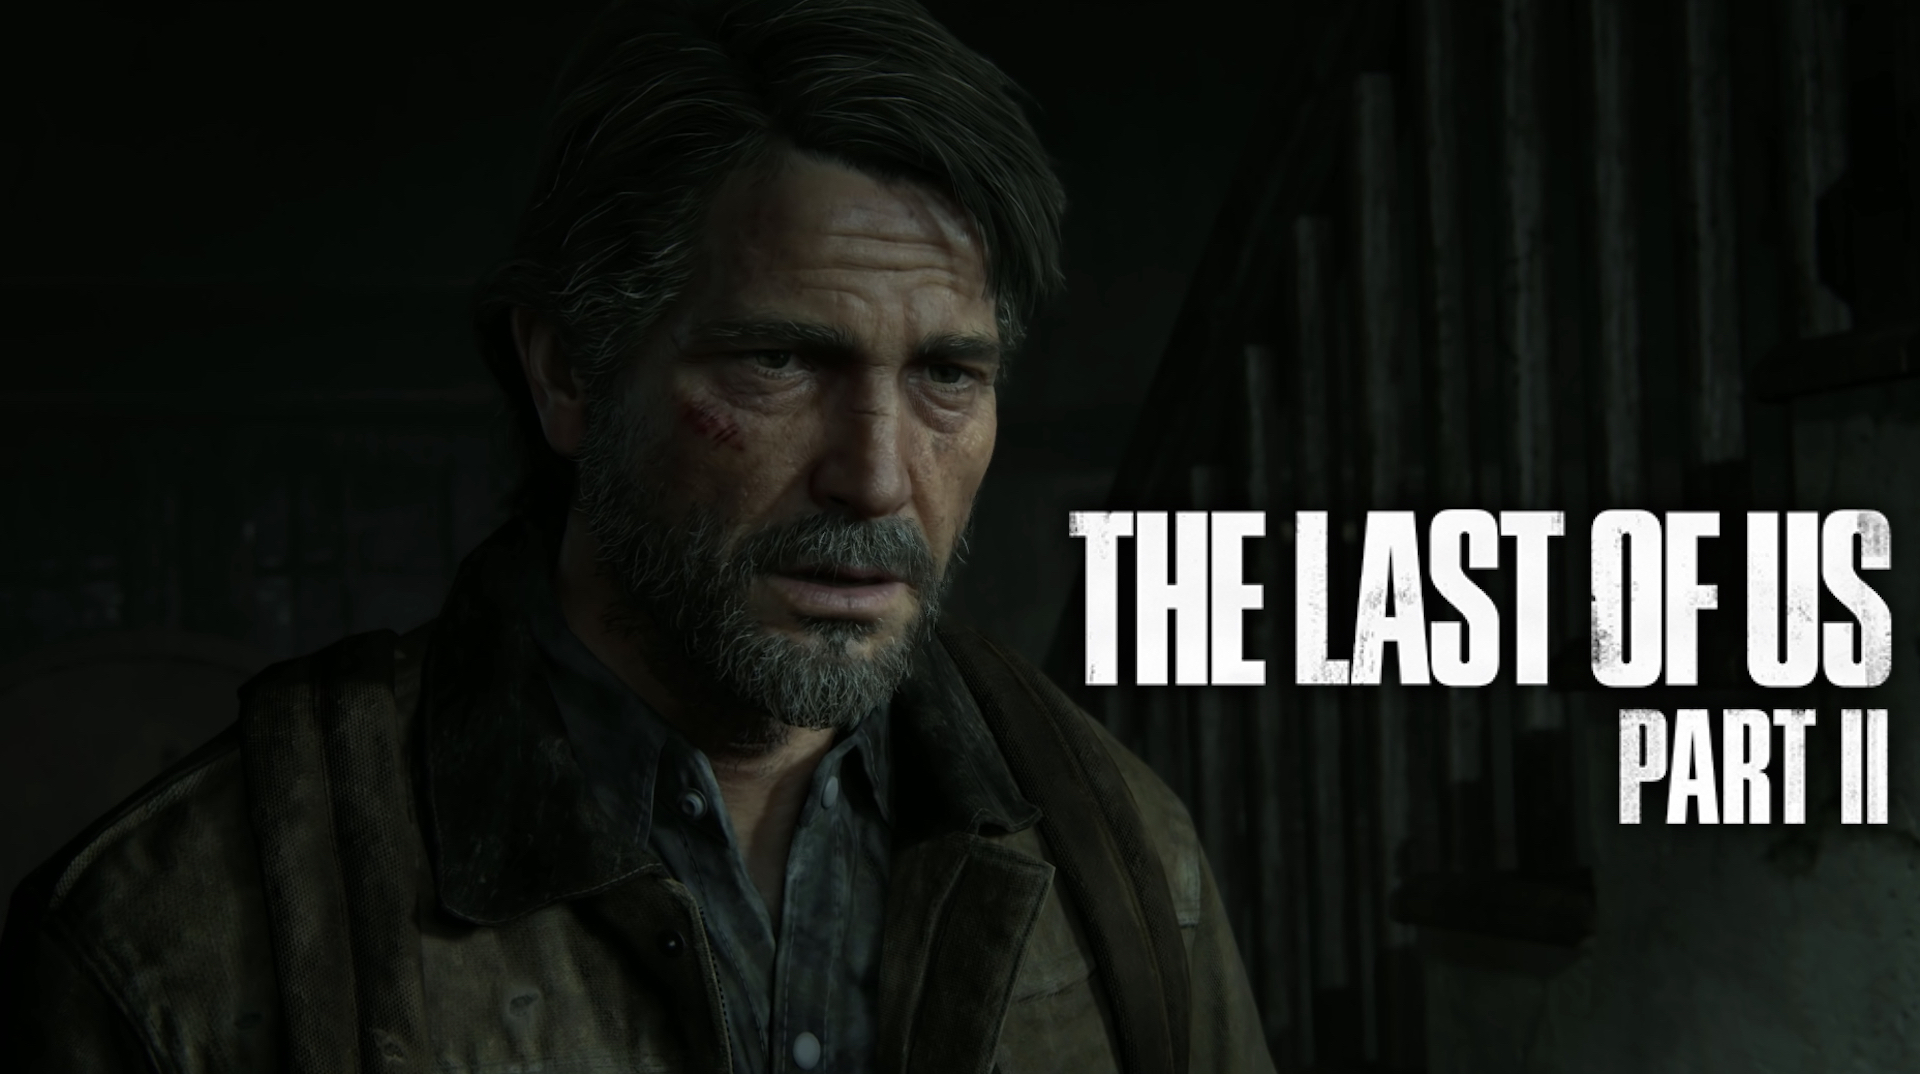 Last of Us 3 Theories: What Could Happen in a Naughty Dog Sequel?